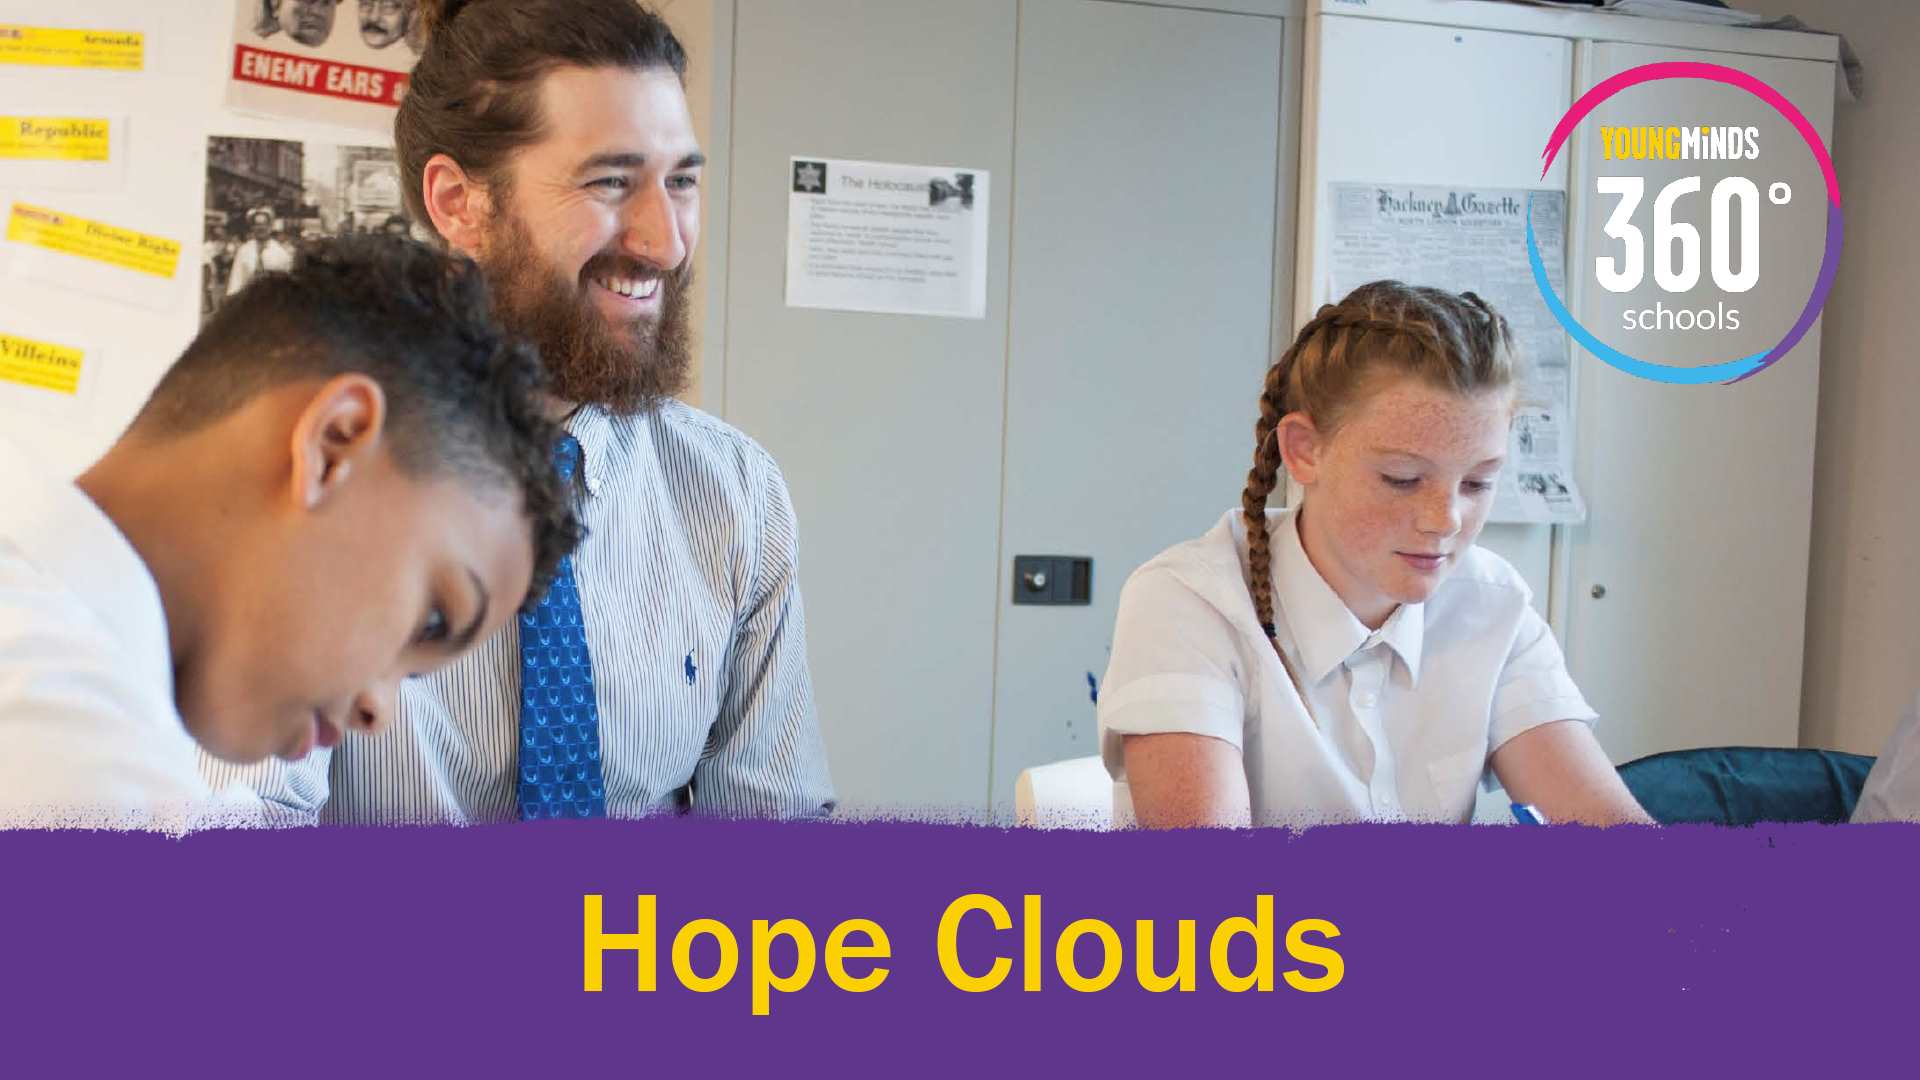 An image of a teacher with two young people with our Young Minds 360 degrees schools logo, at the bottom of the image the text reads 'Hope Clouds'.